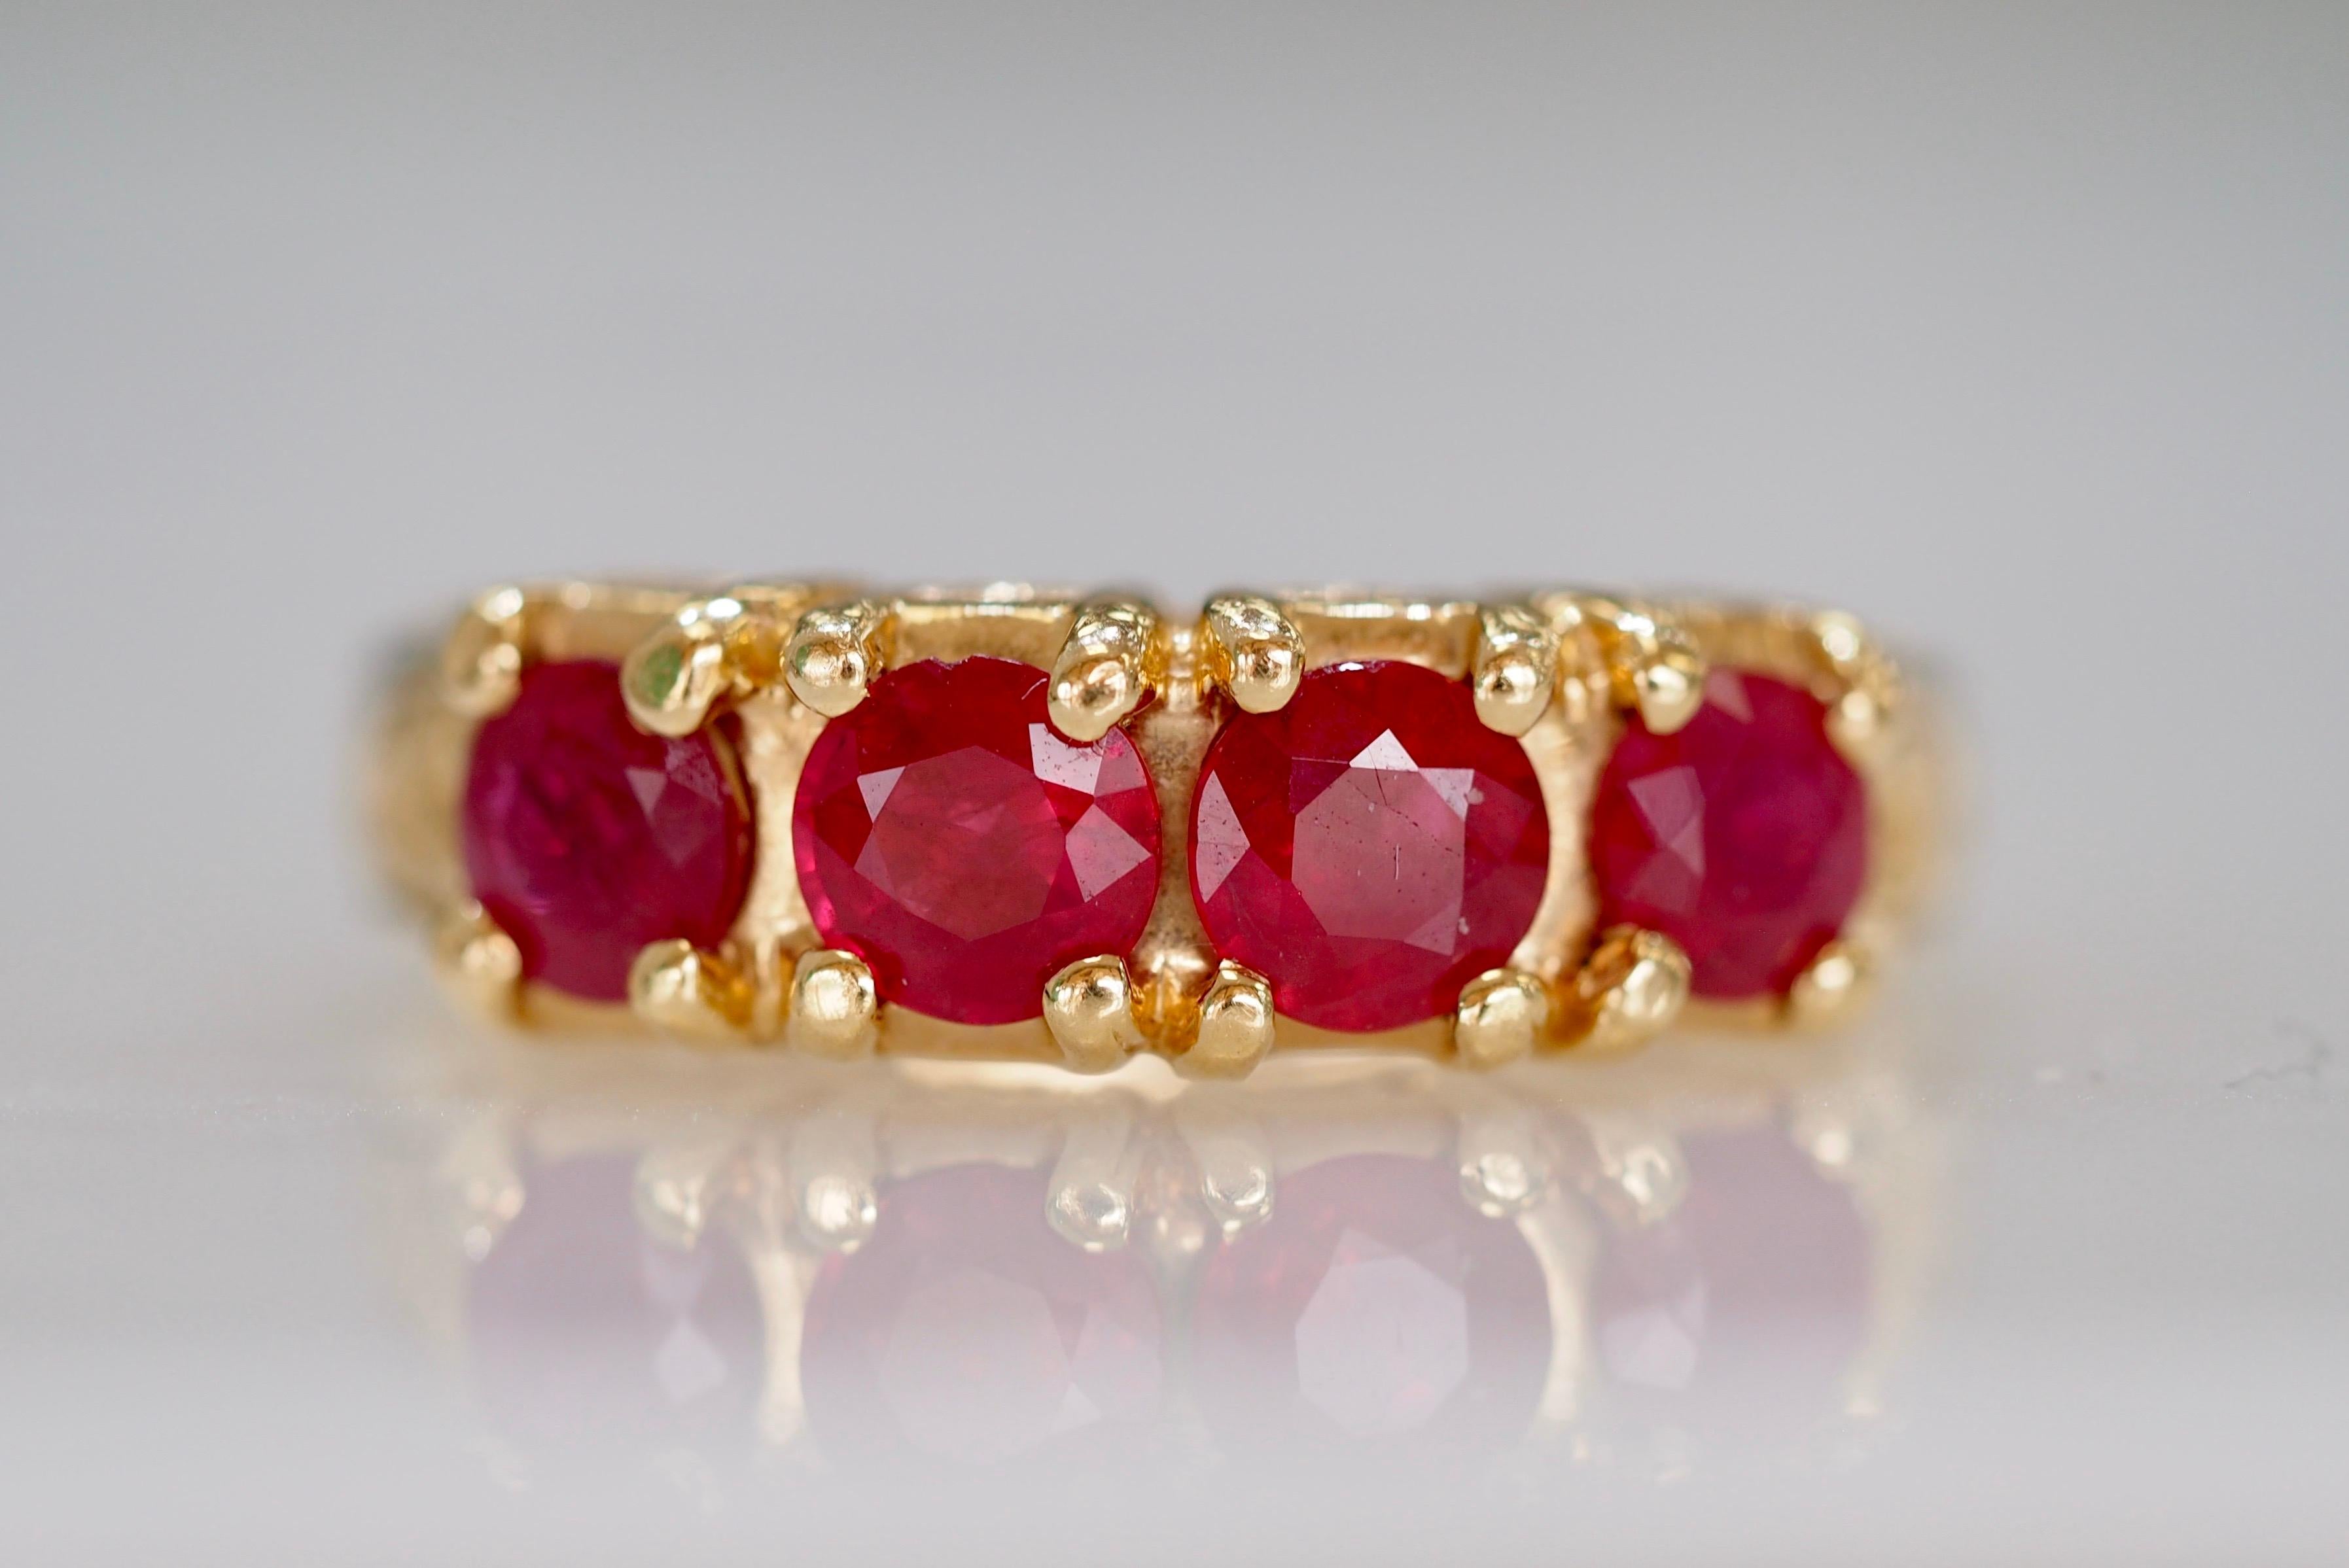 This Retro 1980's ruby band is the perfect every day pop of color. This timeless band can be worn on its own,  as a stackable ring or an engagement band. The band has a substantial weight of 10.4 grams. It has beautiful scroll work engraved down the